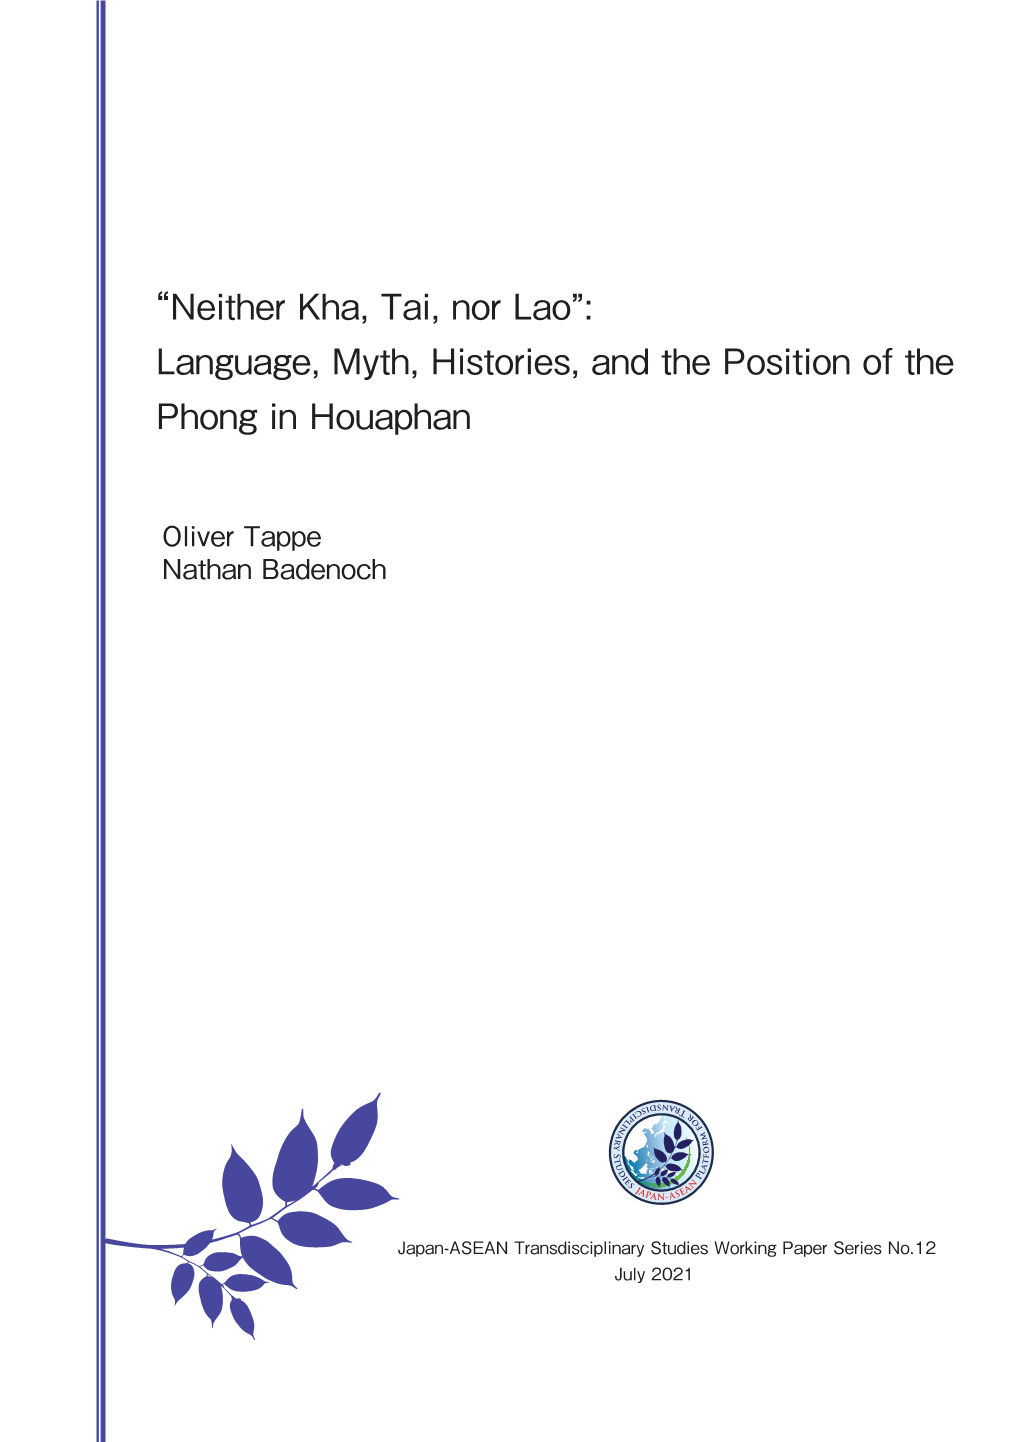 Language, Myth, Histories, and the Position of the Phong in Houaphan